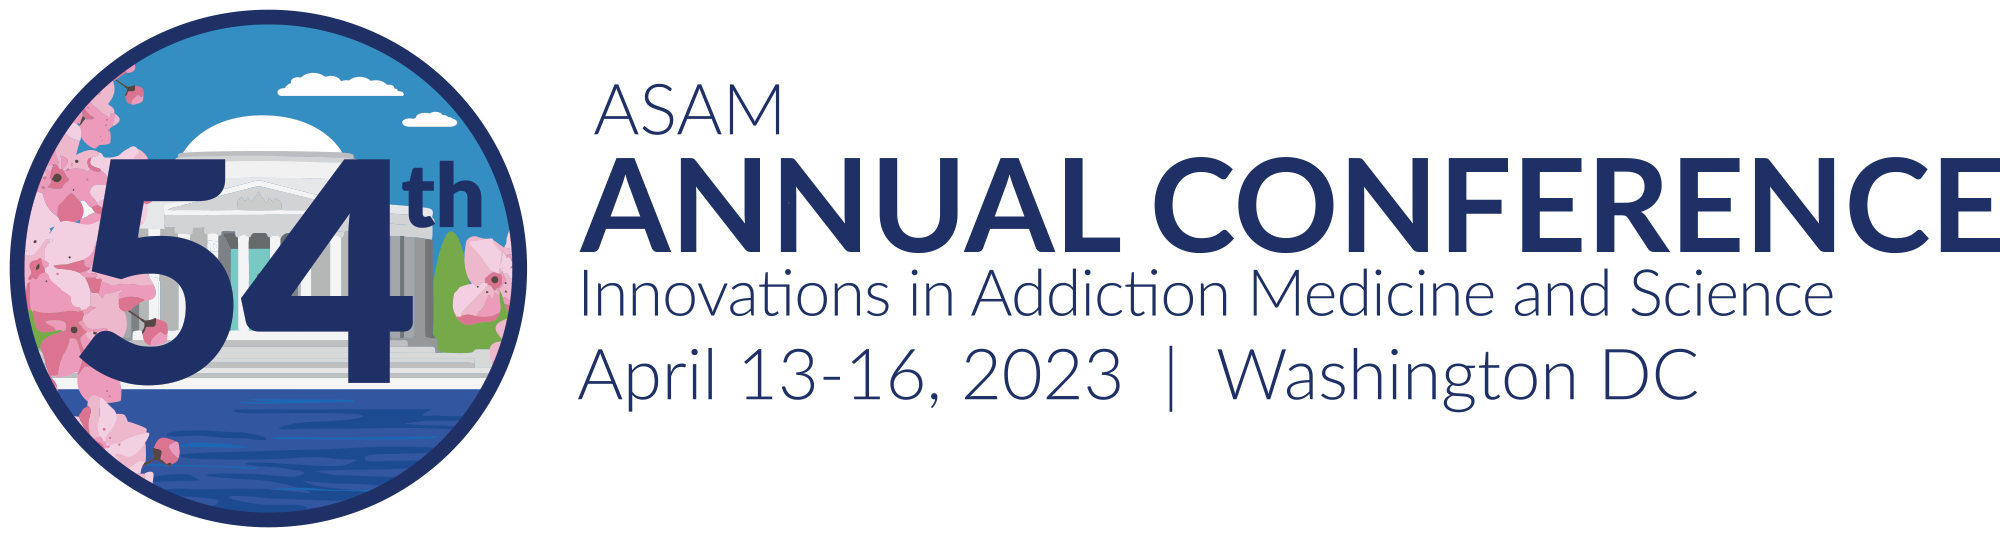 Logo for ASAM's 54th Annual Conference